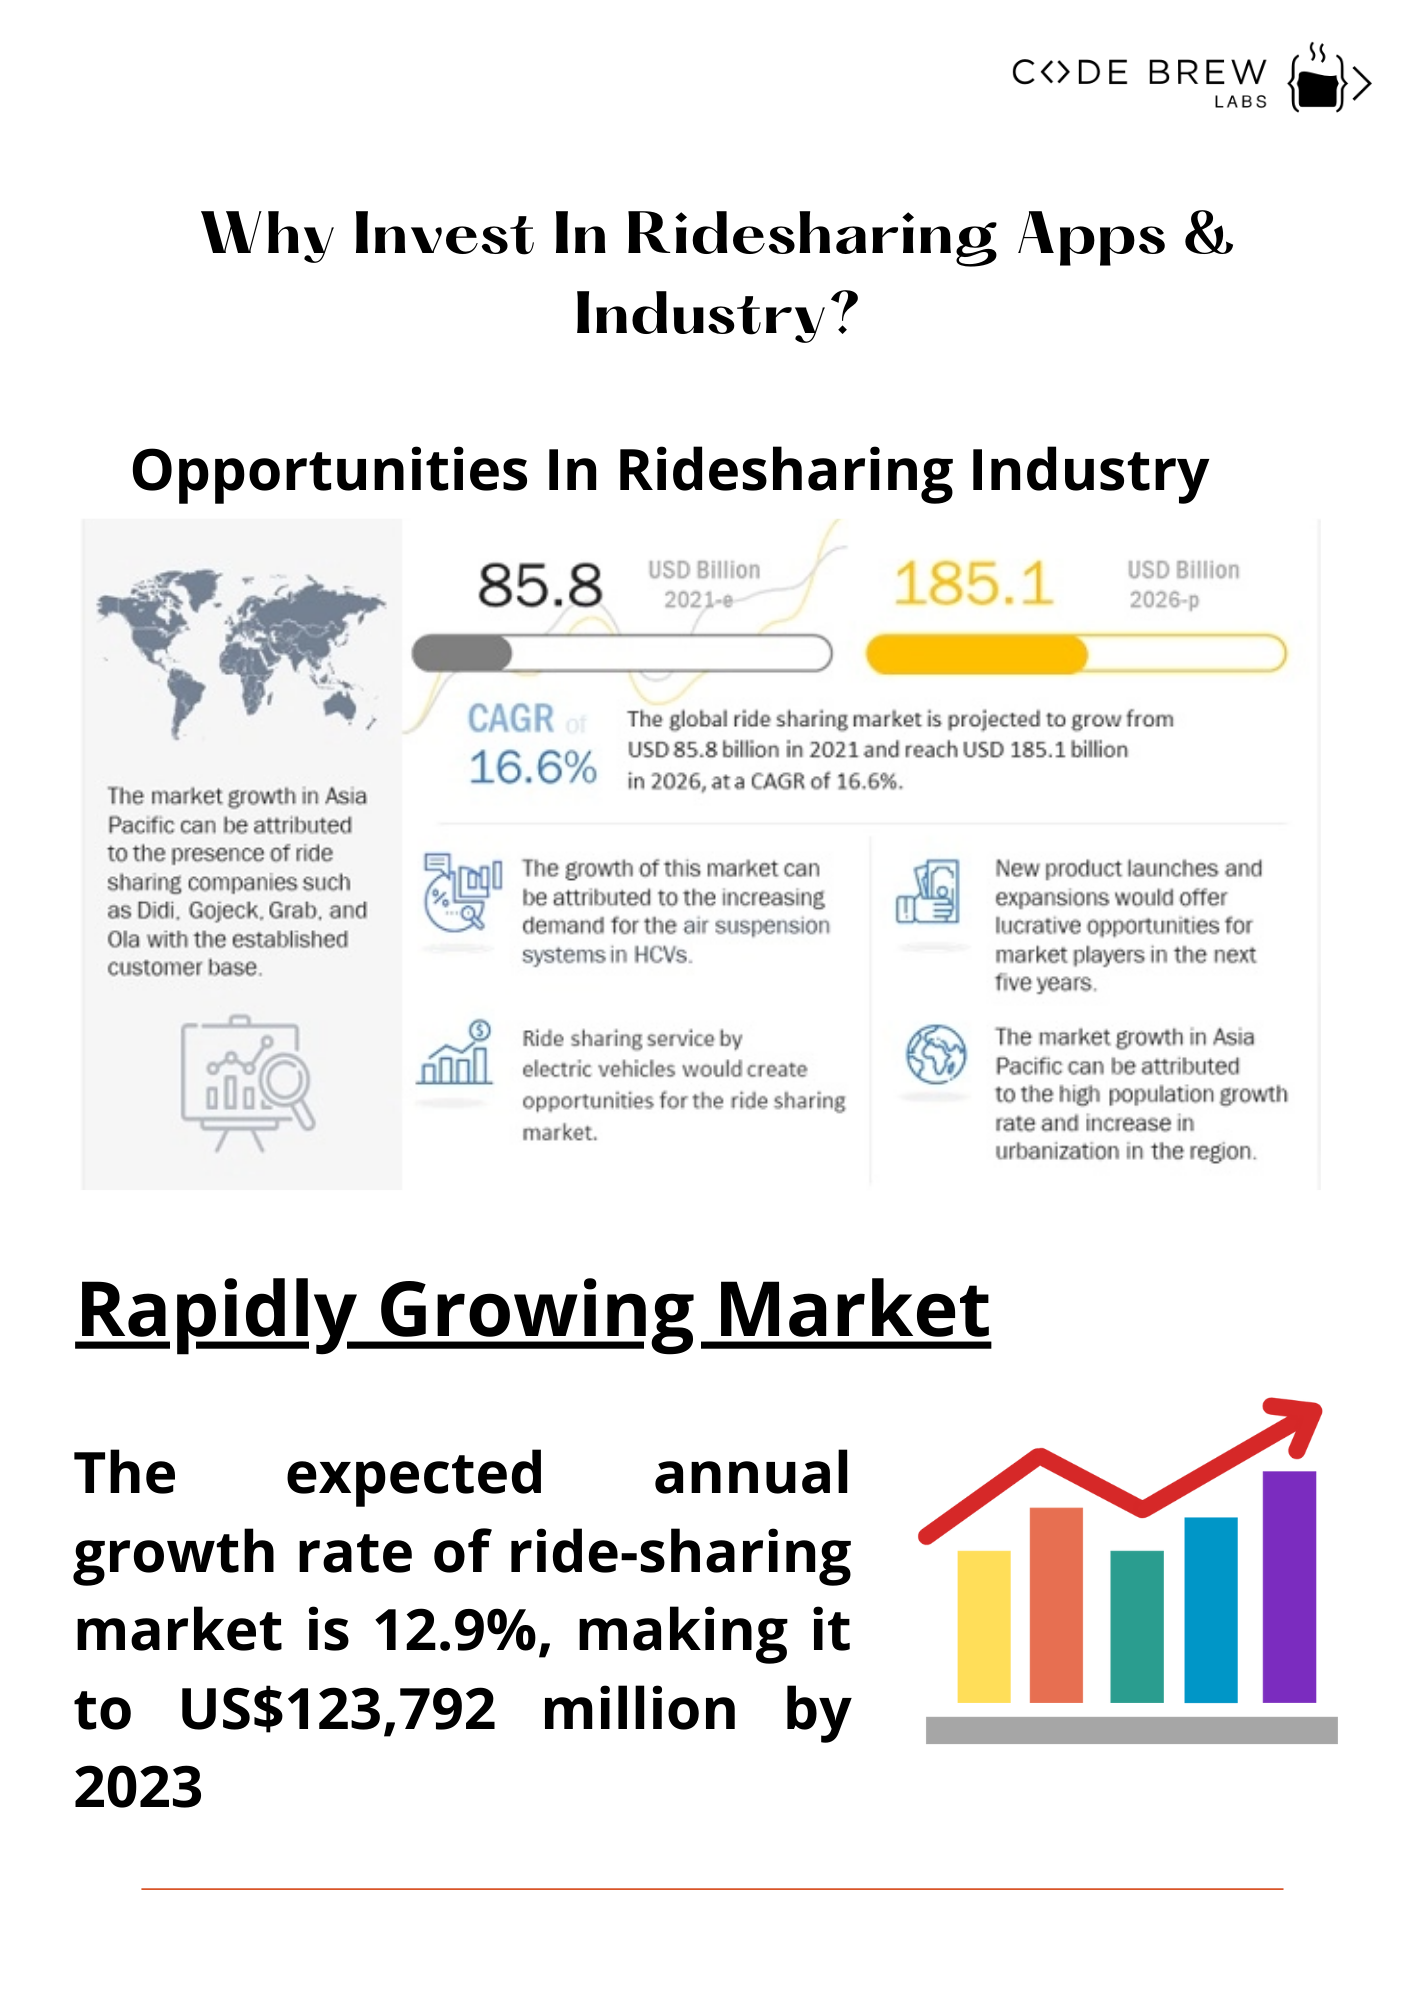 why invest in rideshare apps - code brew labs